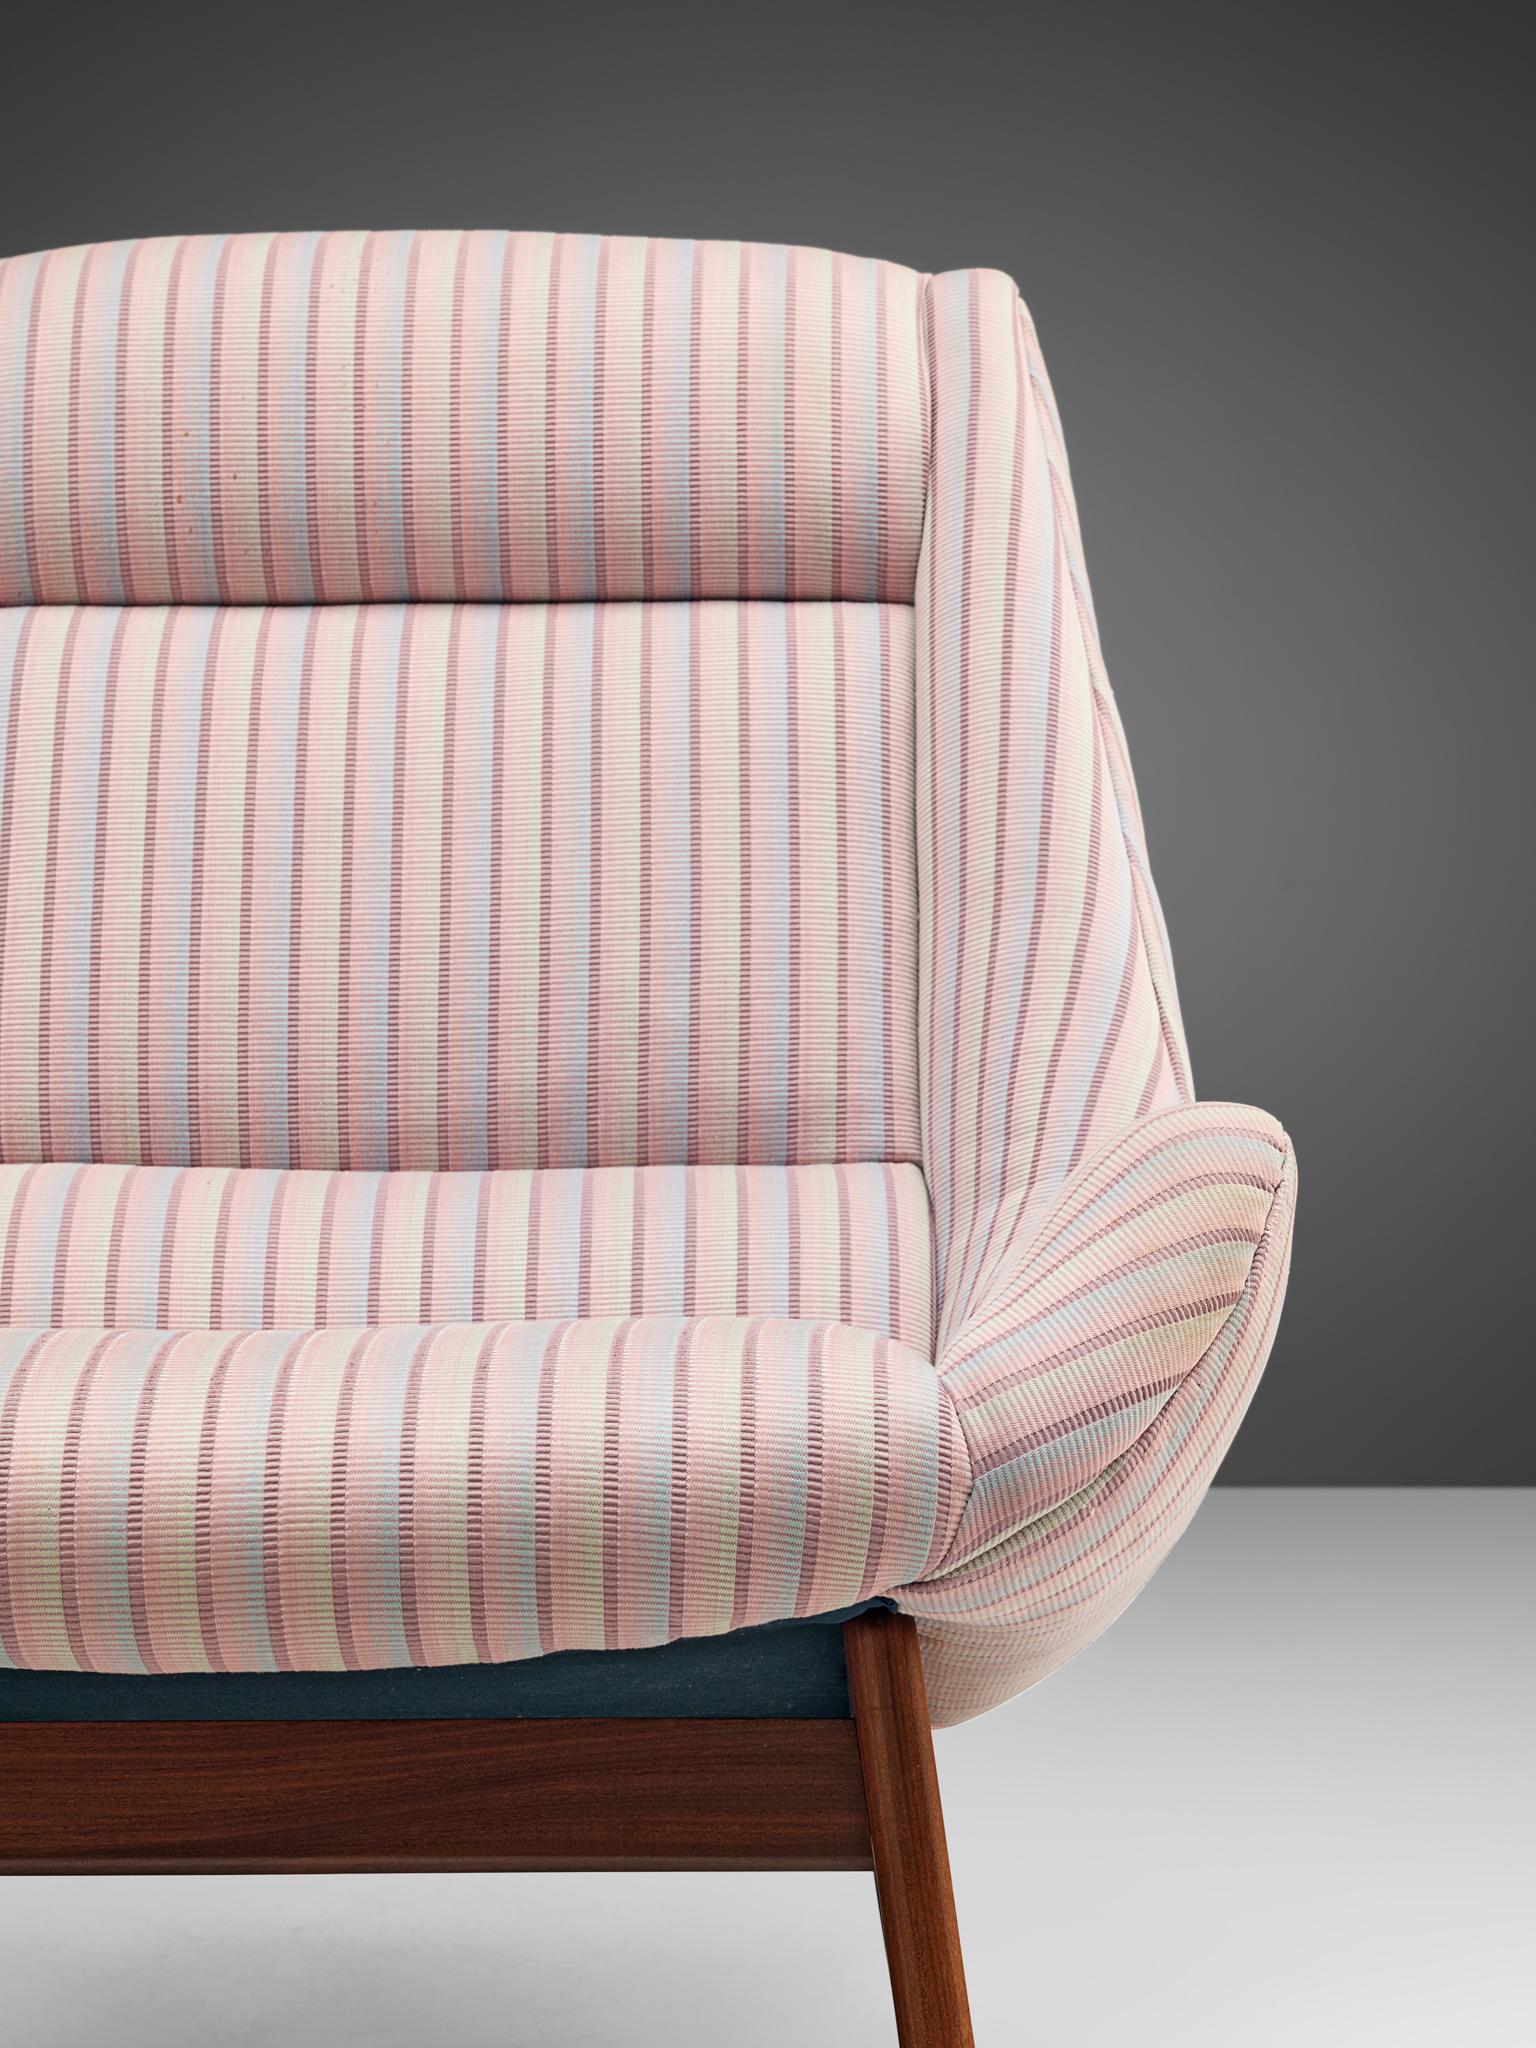 Mid-20th Century Lounge Chair in Pink Striped Upholstery